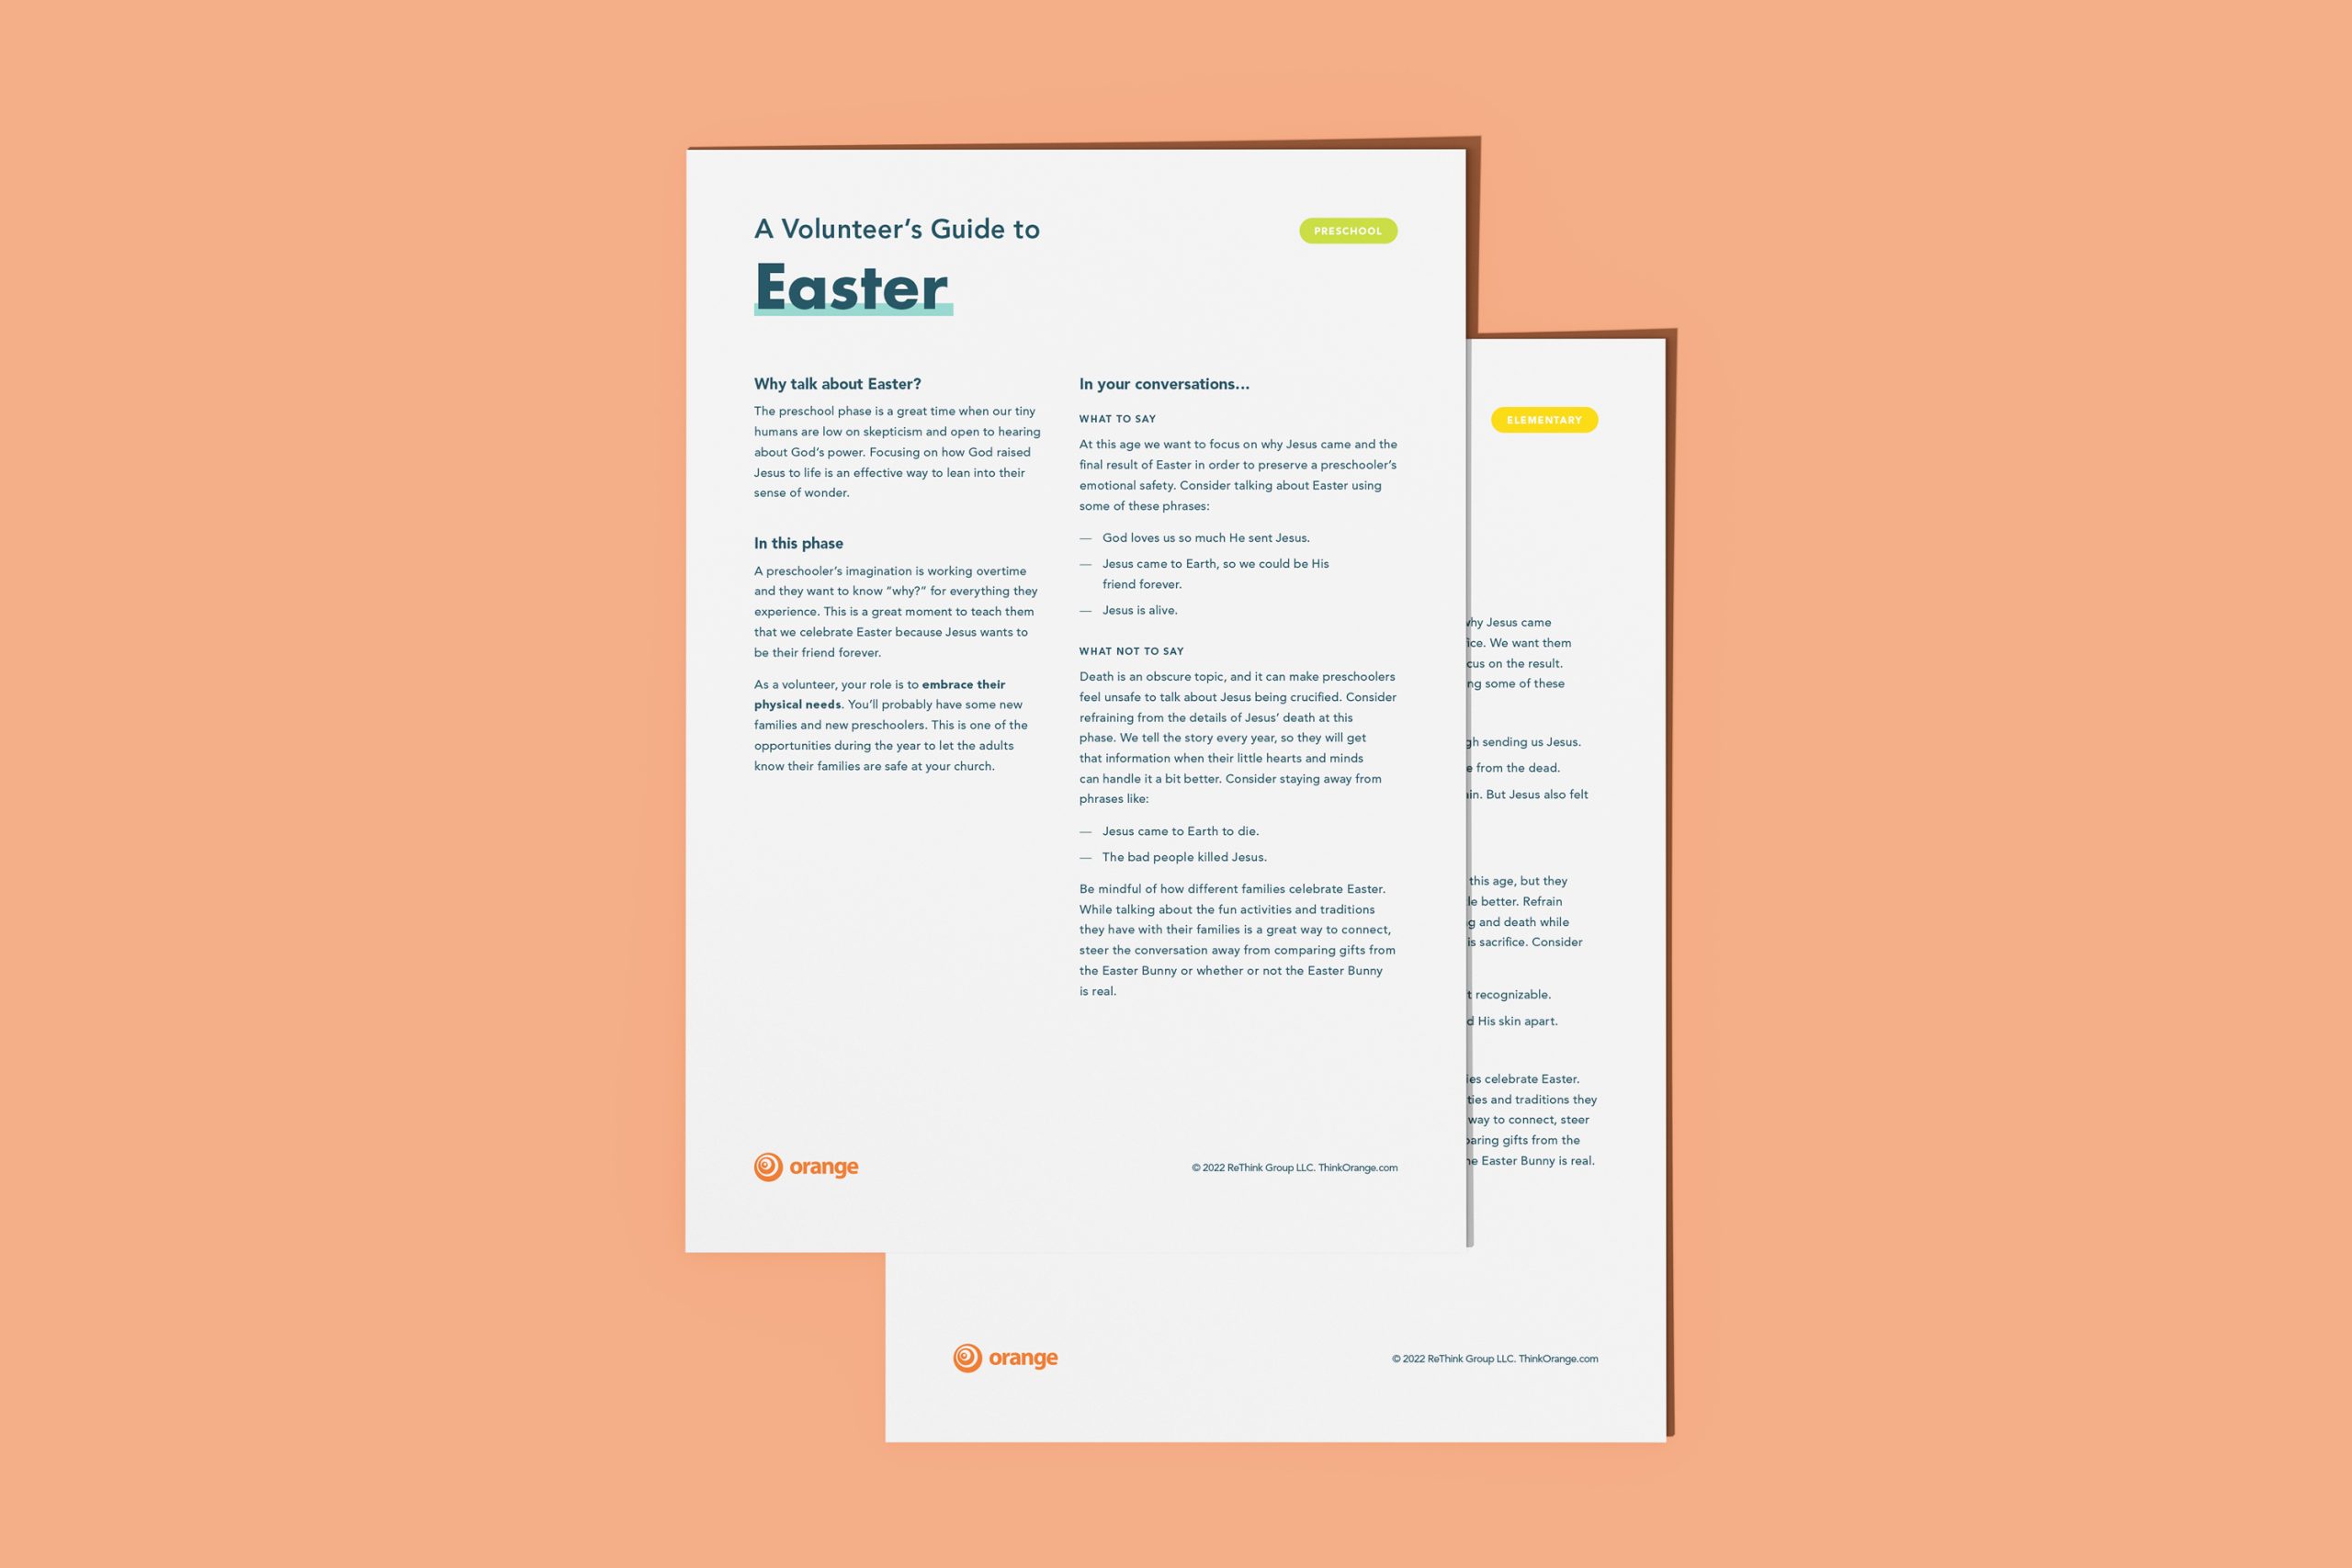 A Kids Ministry Volunteer’s Guide to Easter